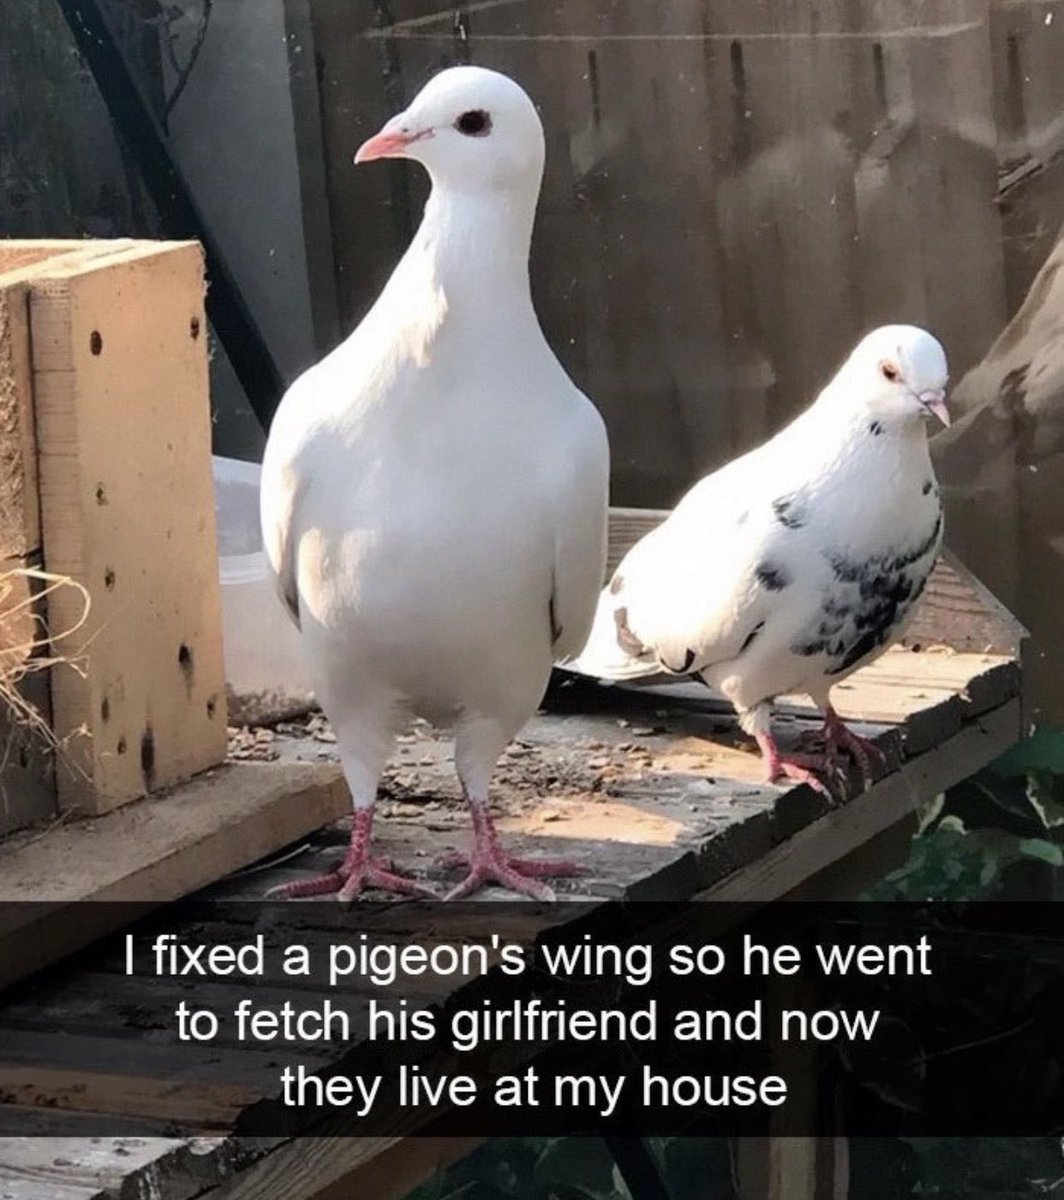 dudes posting their w's - pigeons and doves - I fixed a pigeon's wing so he went to fetch his girlfriend and now they live at my house